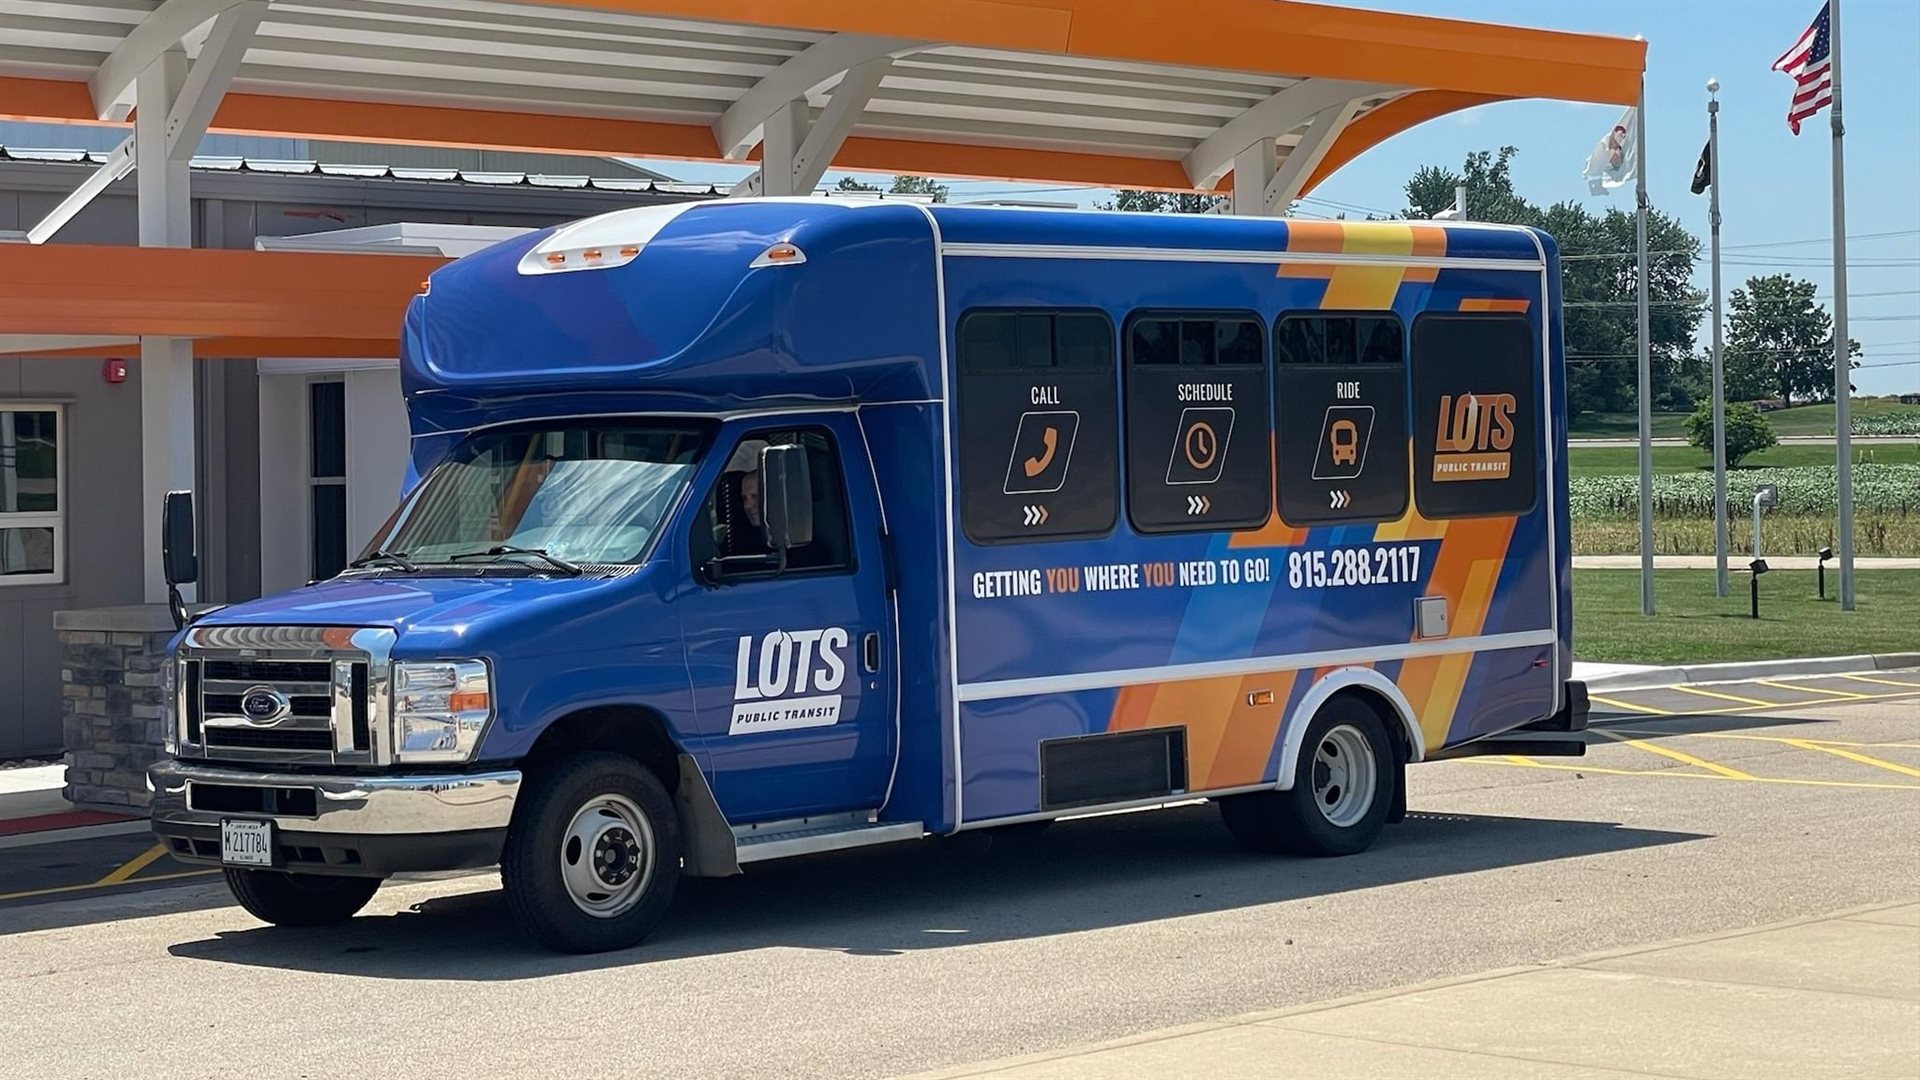 Illinois Department of Transportation provides capital and operating funding to more than 50 public transit agencies statewide. Maintenance costs are the second-highest expense category for those transit agencies after vehicle-operating costs.